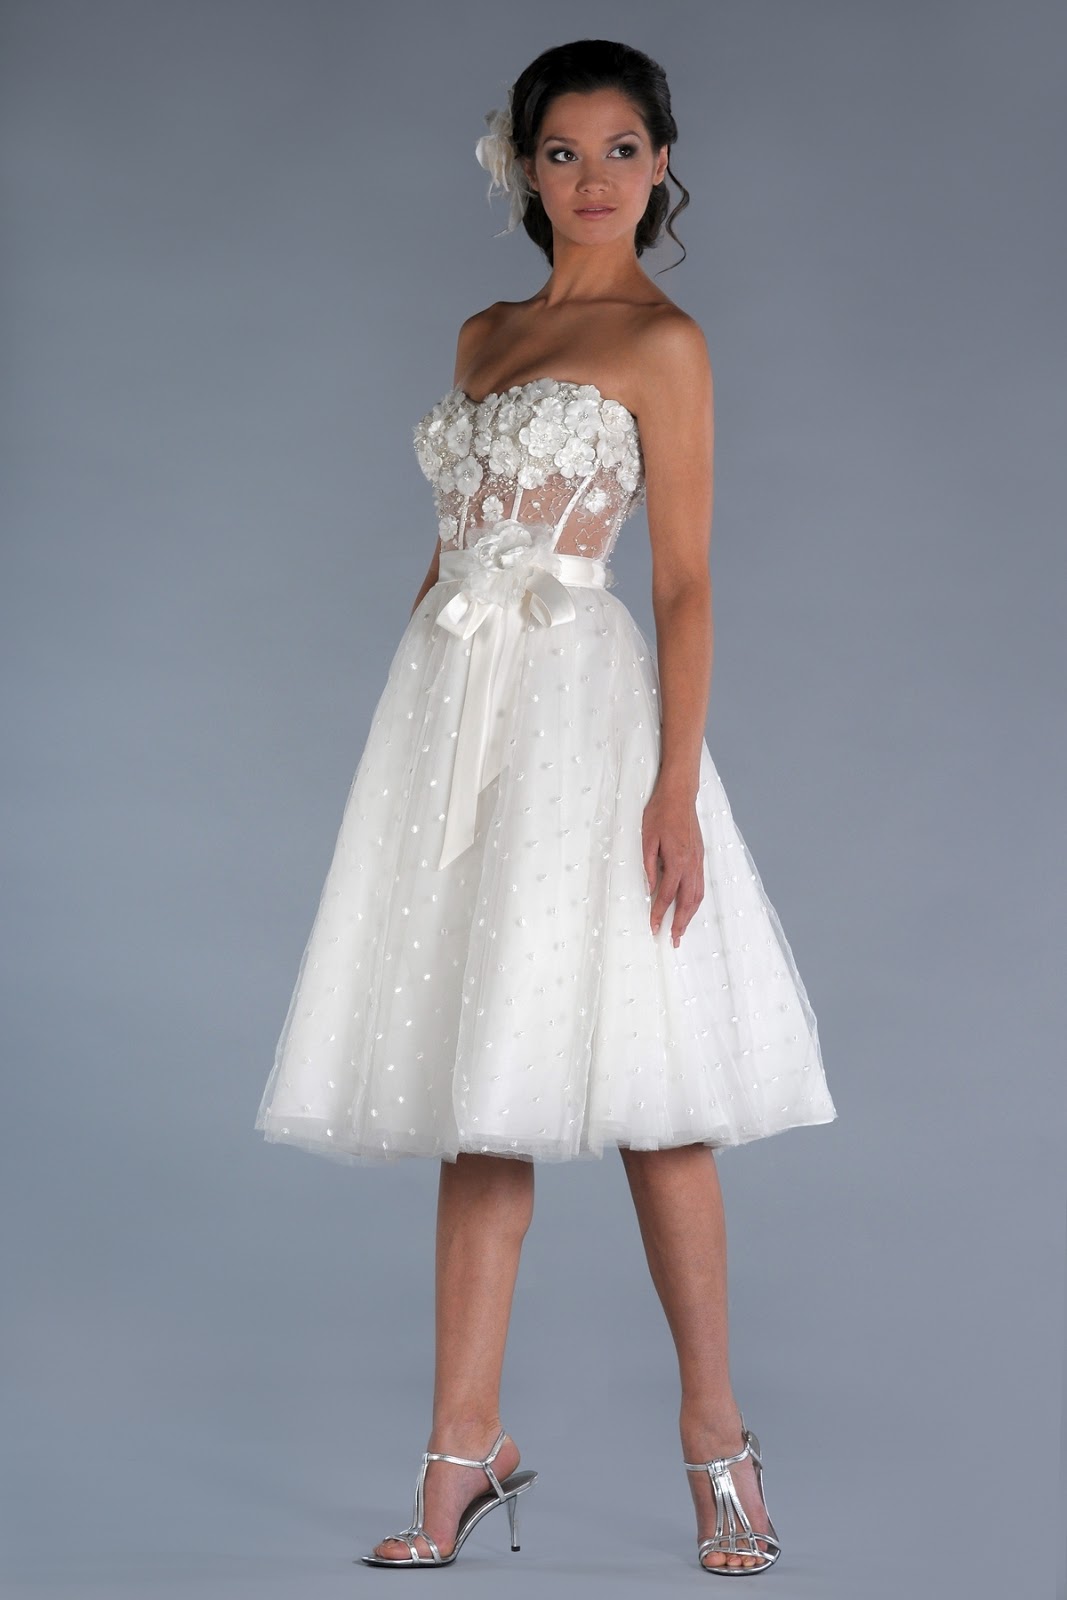 lace wedding dresses with sleeves Cute short wedding dress with colored sash and bubble hem